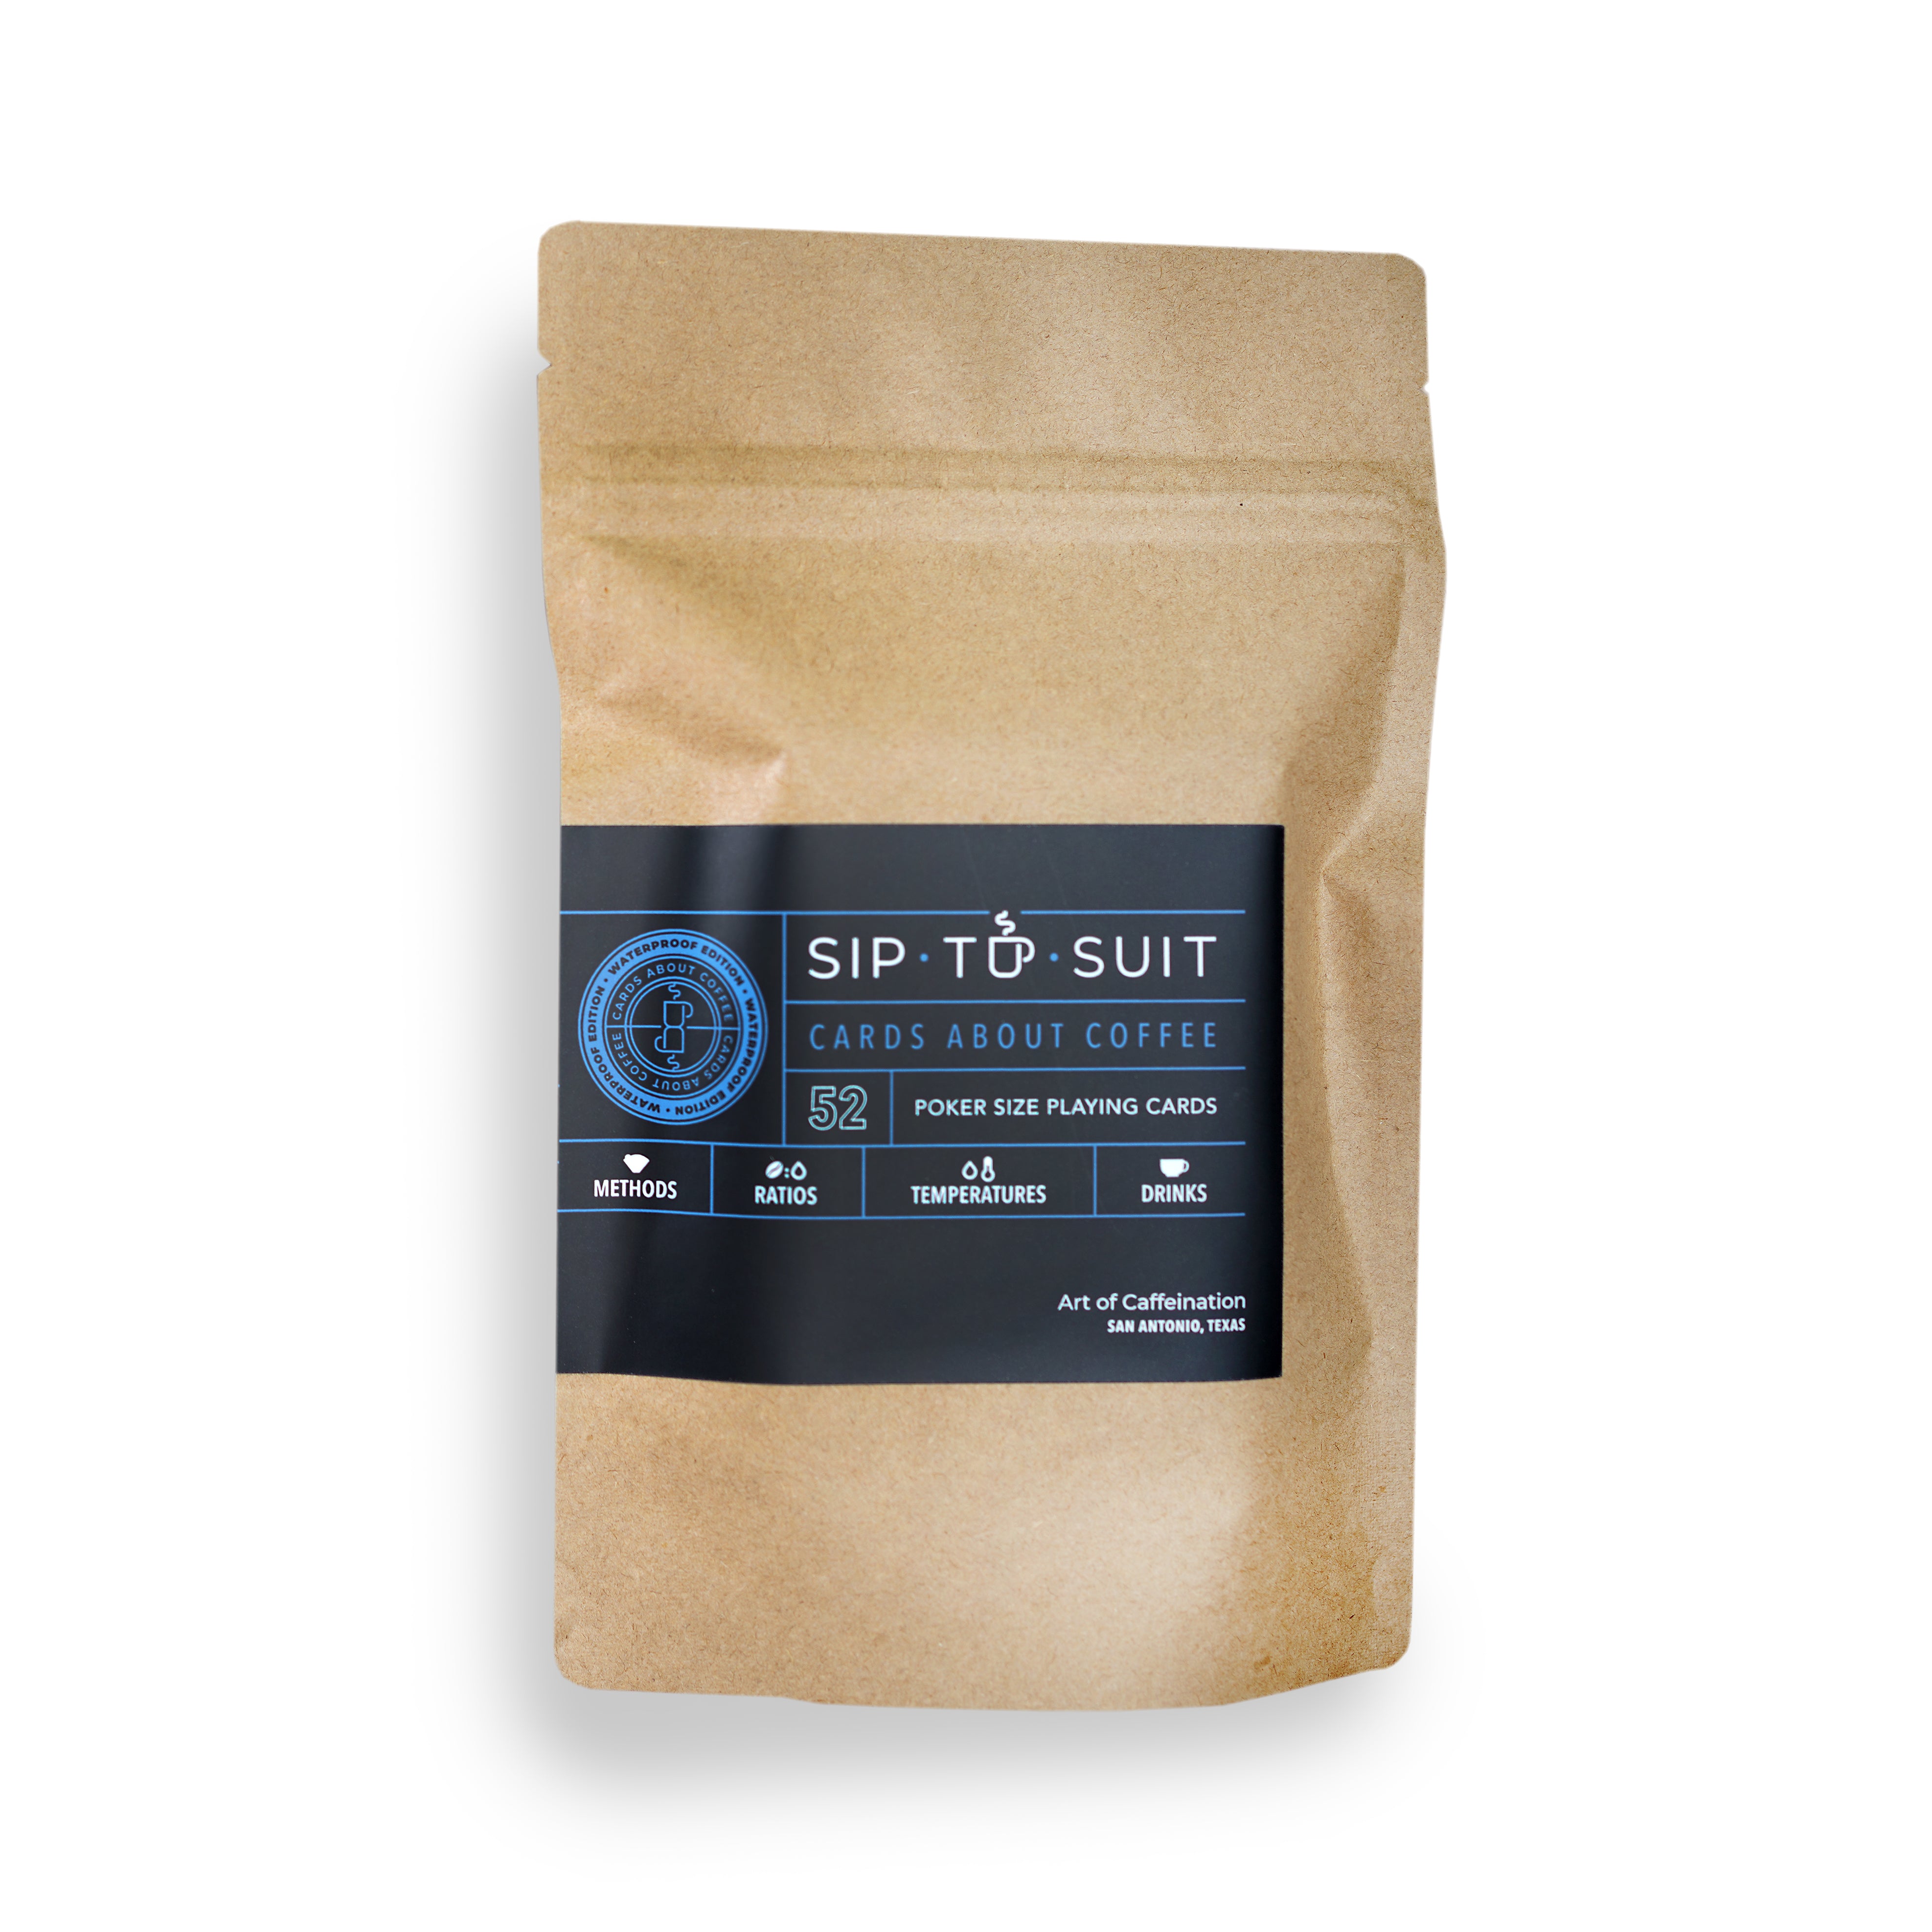 SIP-TO-SUIT Cards About Coffee - Waterproof Edition - Art of Caffeination